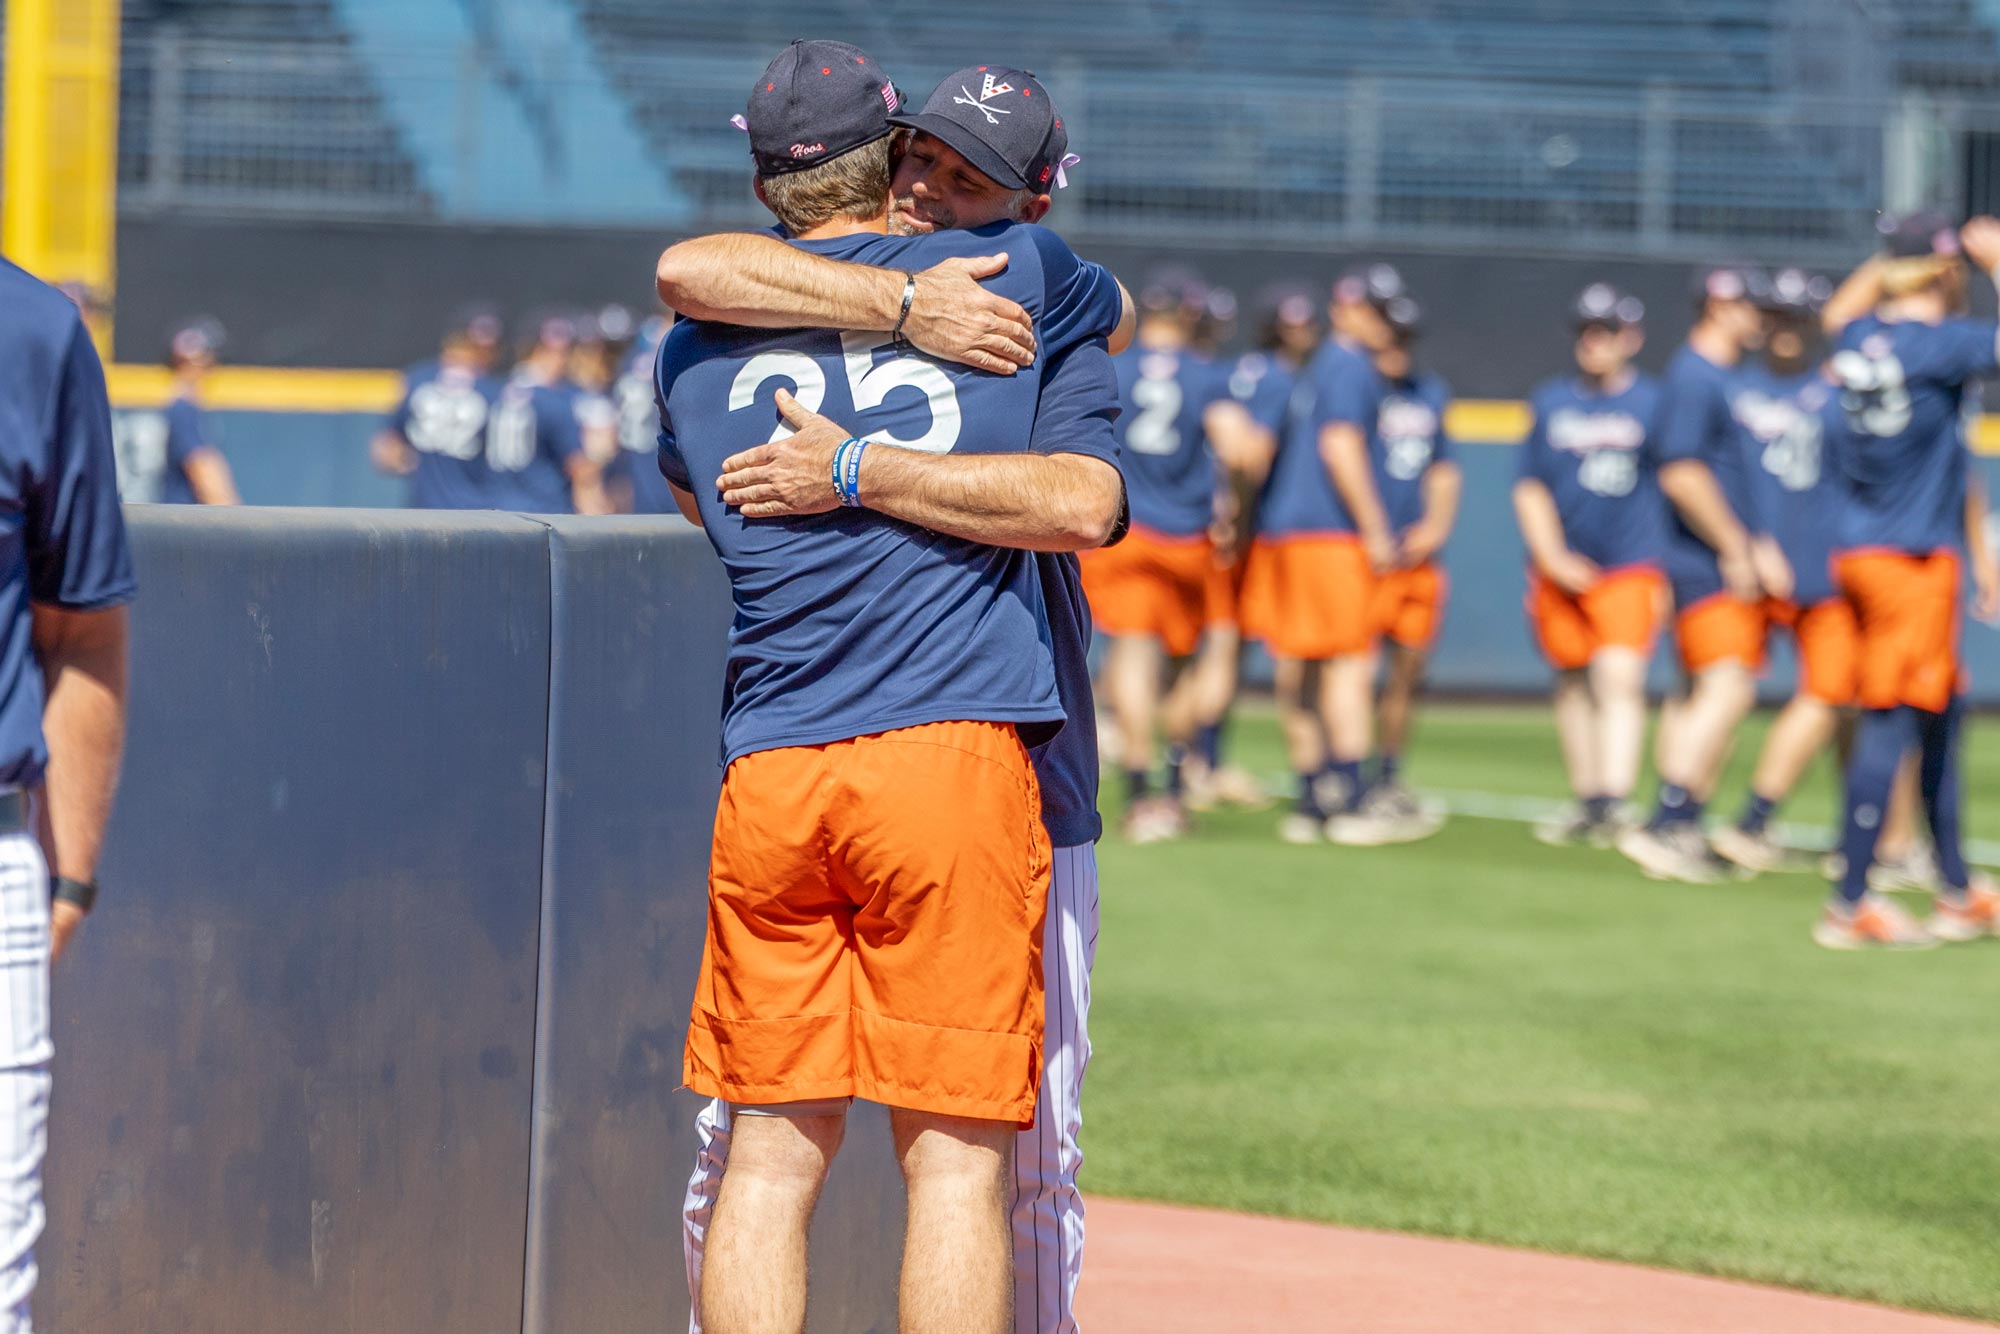 UVA assistant coach Matt Kirby, who lost his father in October of 2021, has been by Buchanan’s side through the last six months. Like he did after Buchanan was presented with the Craig Fielder Memorial Award for overcoming adversity in May, Kirby embraced Buchanan again last Saturday after the Cavaliers clinched a spot in the College World Series. 